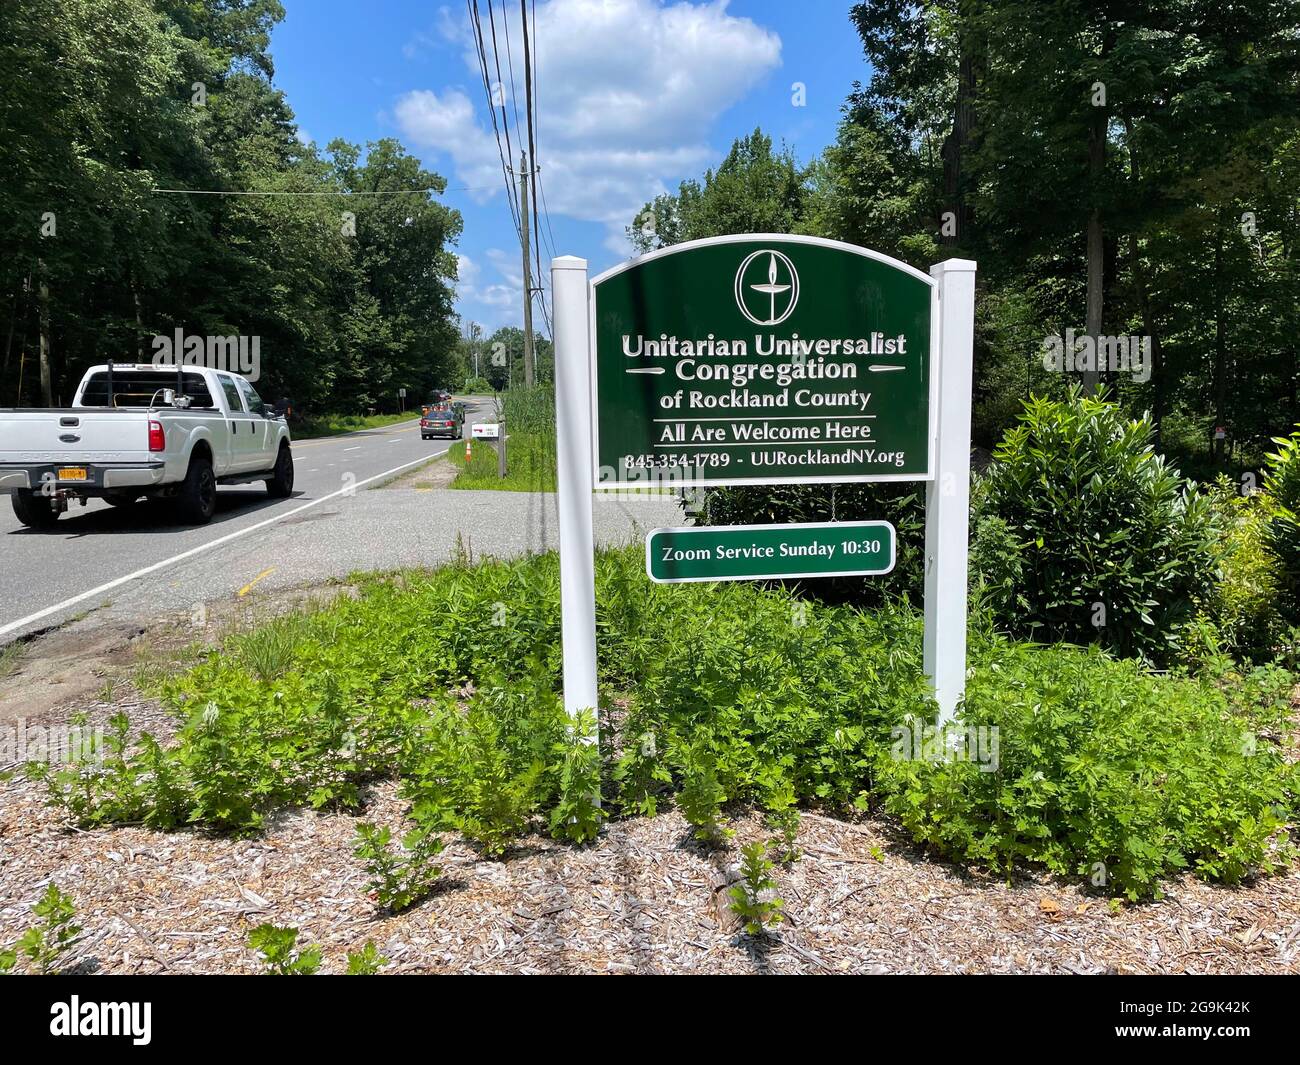 A roadside church sign gives the hours of a Sunday service held on video-conferencing application Zoom, in Pomona, NY, United States, 23 July 2021. Stock Photo